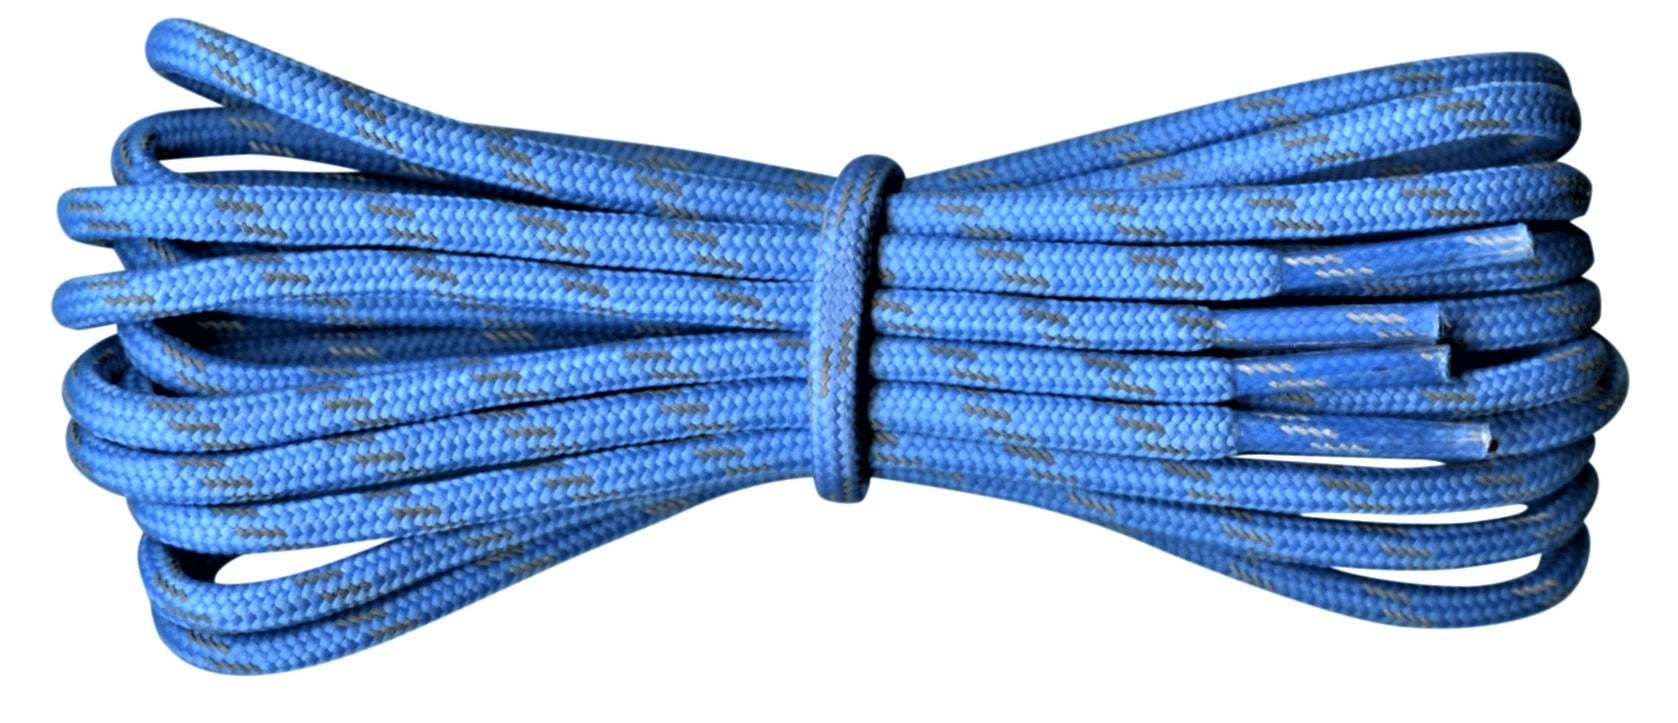 Strong Round Boot Laces Blue with Reflective flecks for hiking or walking  3.5 mm - fabmania shoe laces